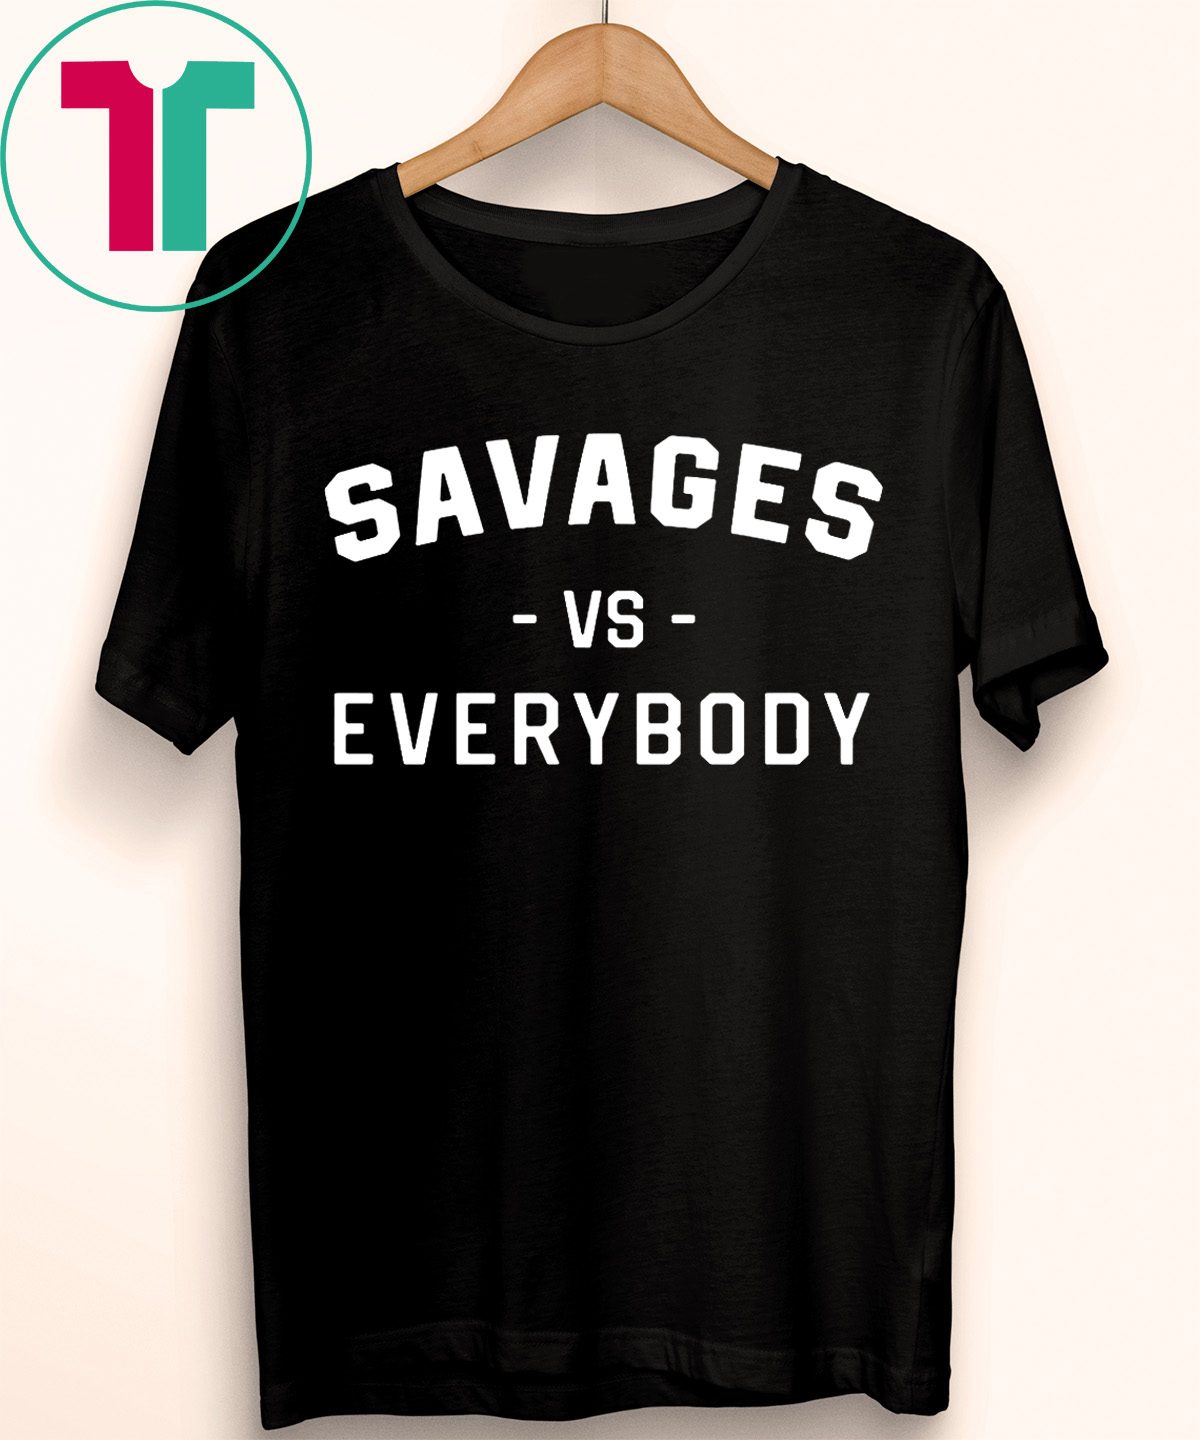 Savages Vs Everybody T-Shirt - Reviewshirts Office